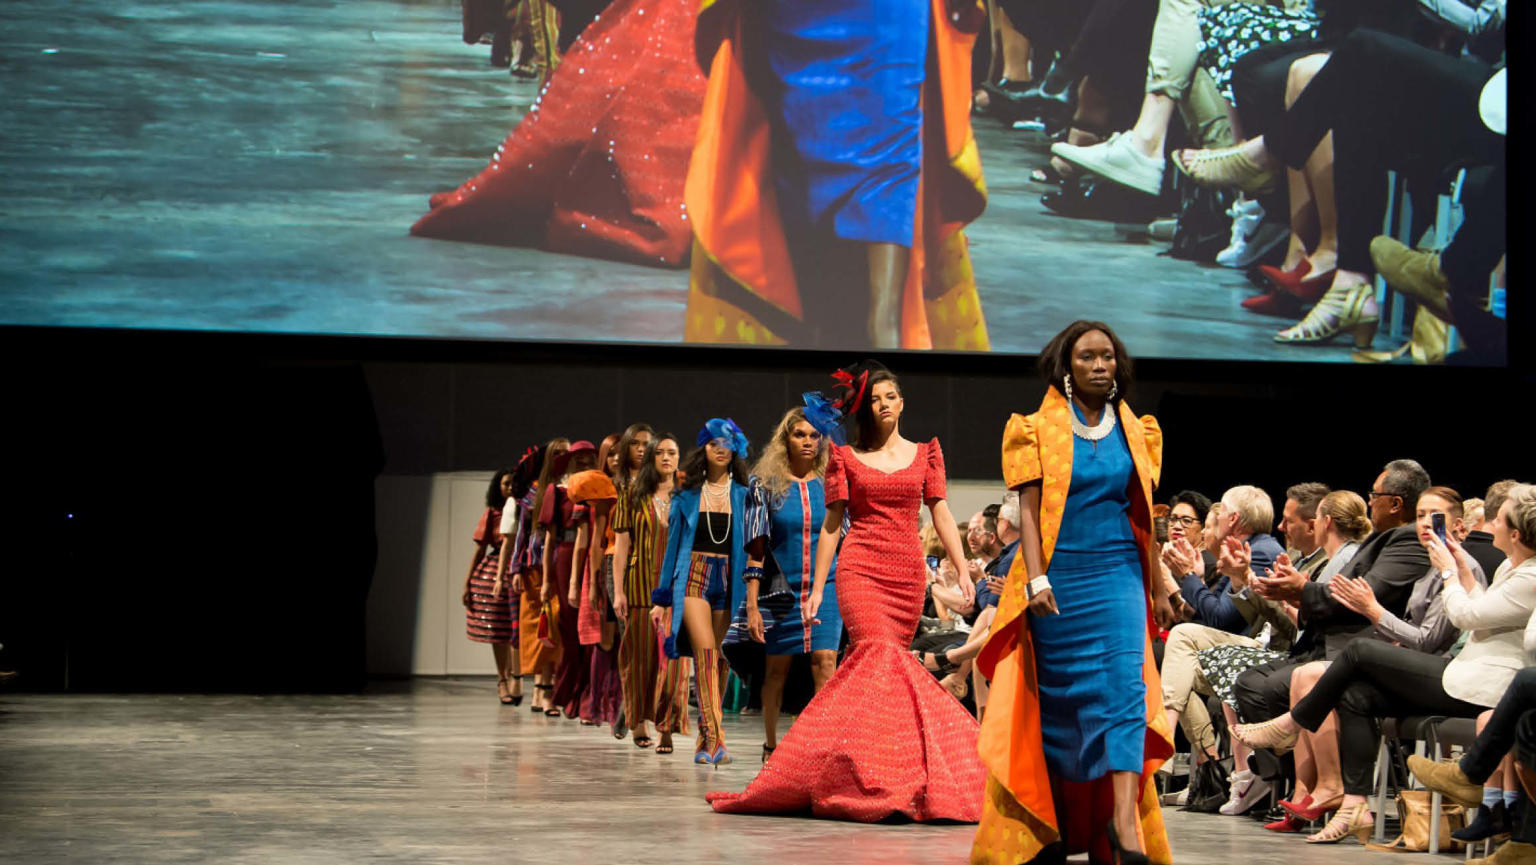 Models dressed in colourful clothing walking on a catwalk, while a large screen serves as the backdrop. The audience applauds in support.